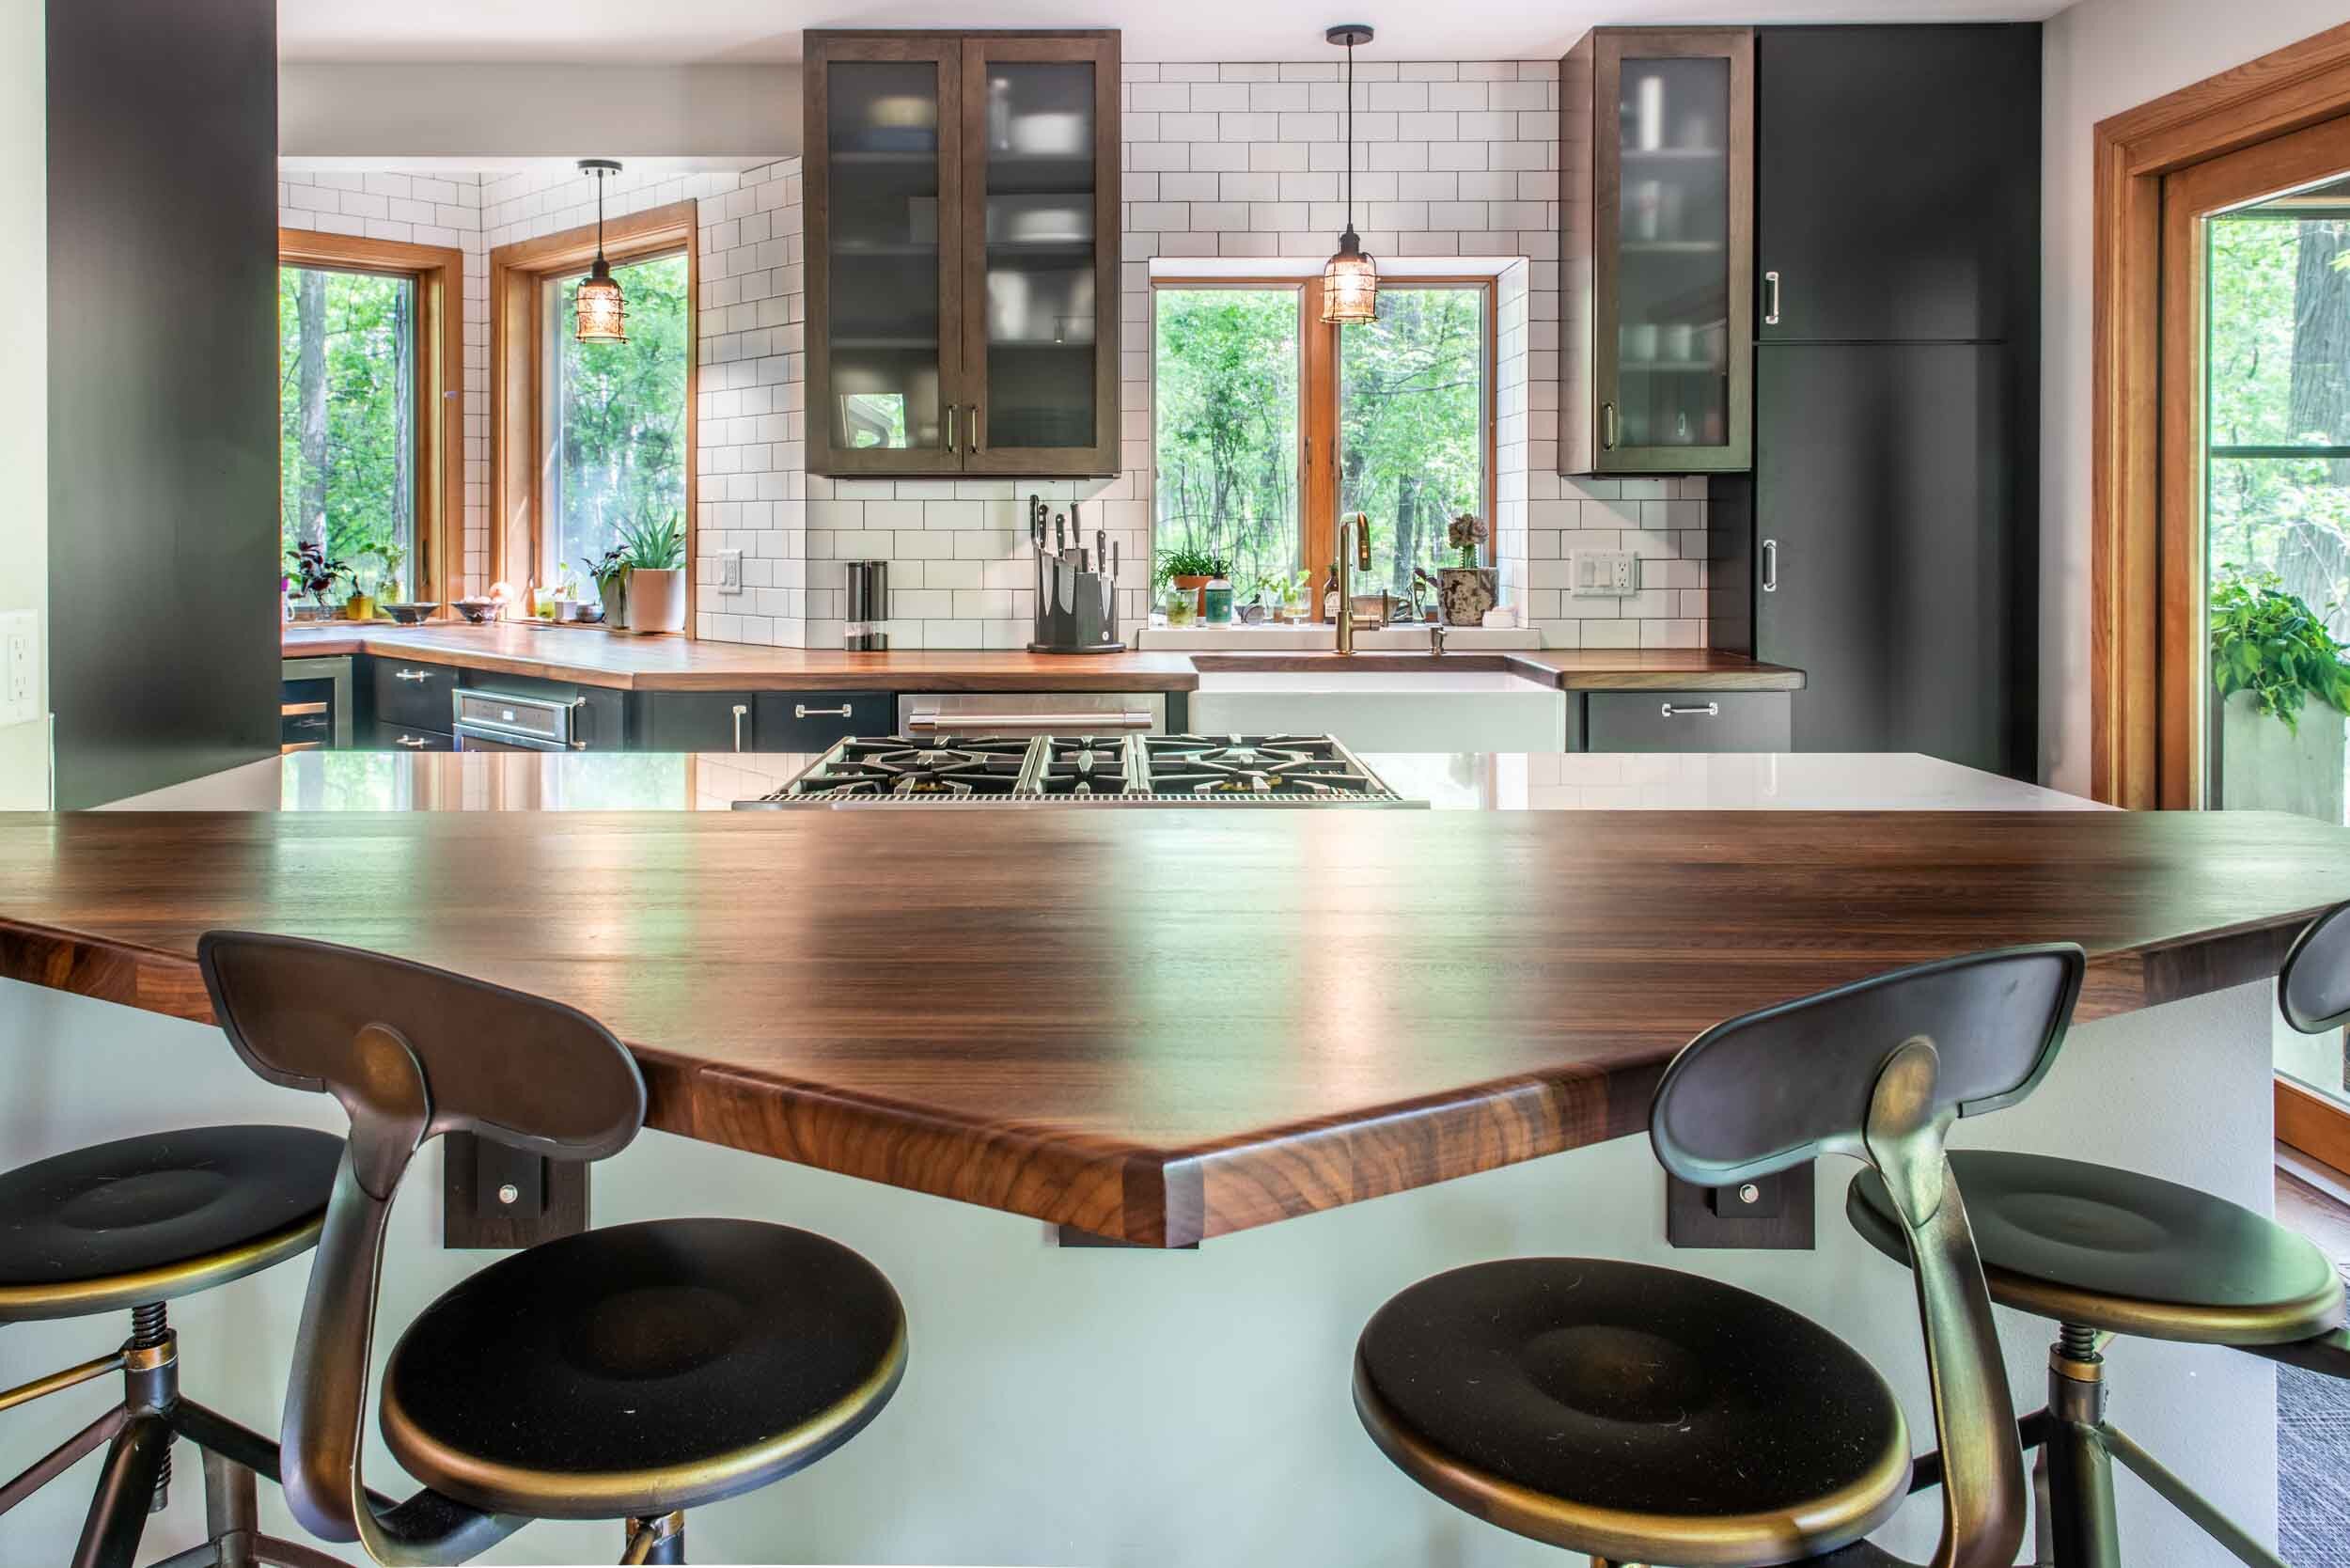 A 1980s Contemporary Gets A New Kitchen Remodel — Degnan Design-Build- Remodel